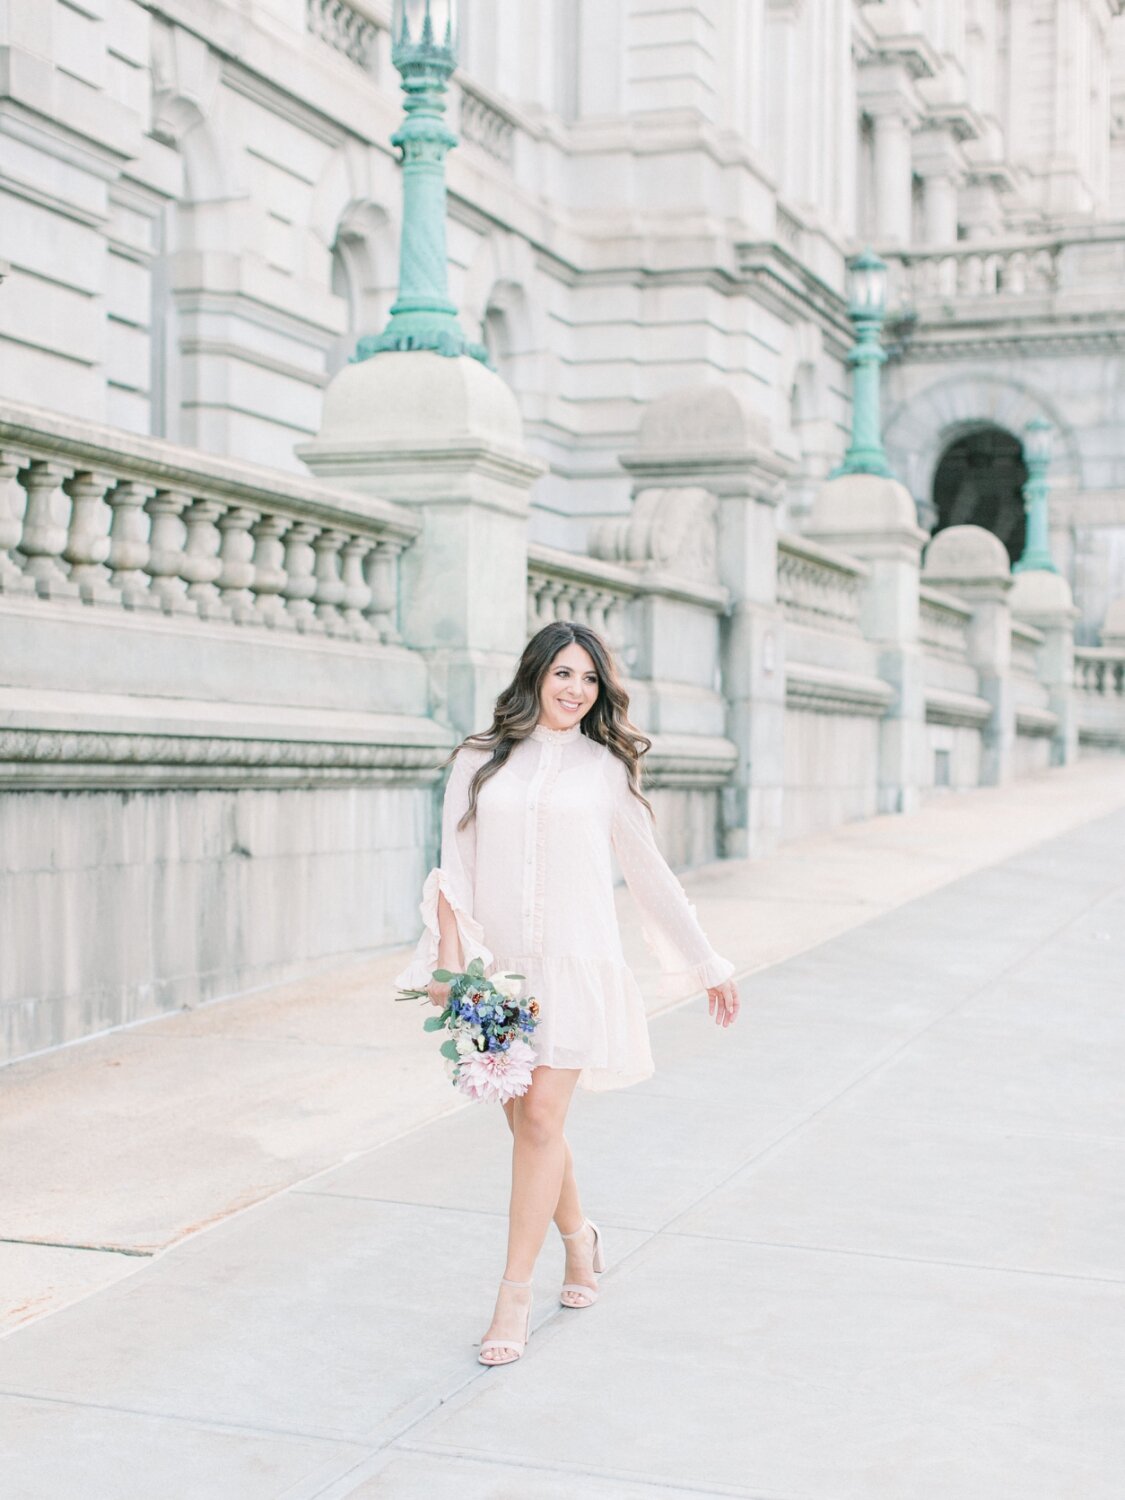 Downtown-Albany-New-York-Engagement-Session_Cassi-Claire_13.jpg